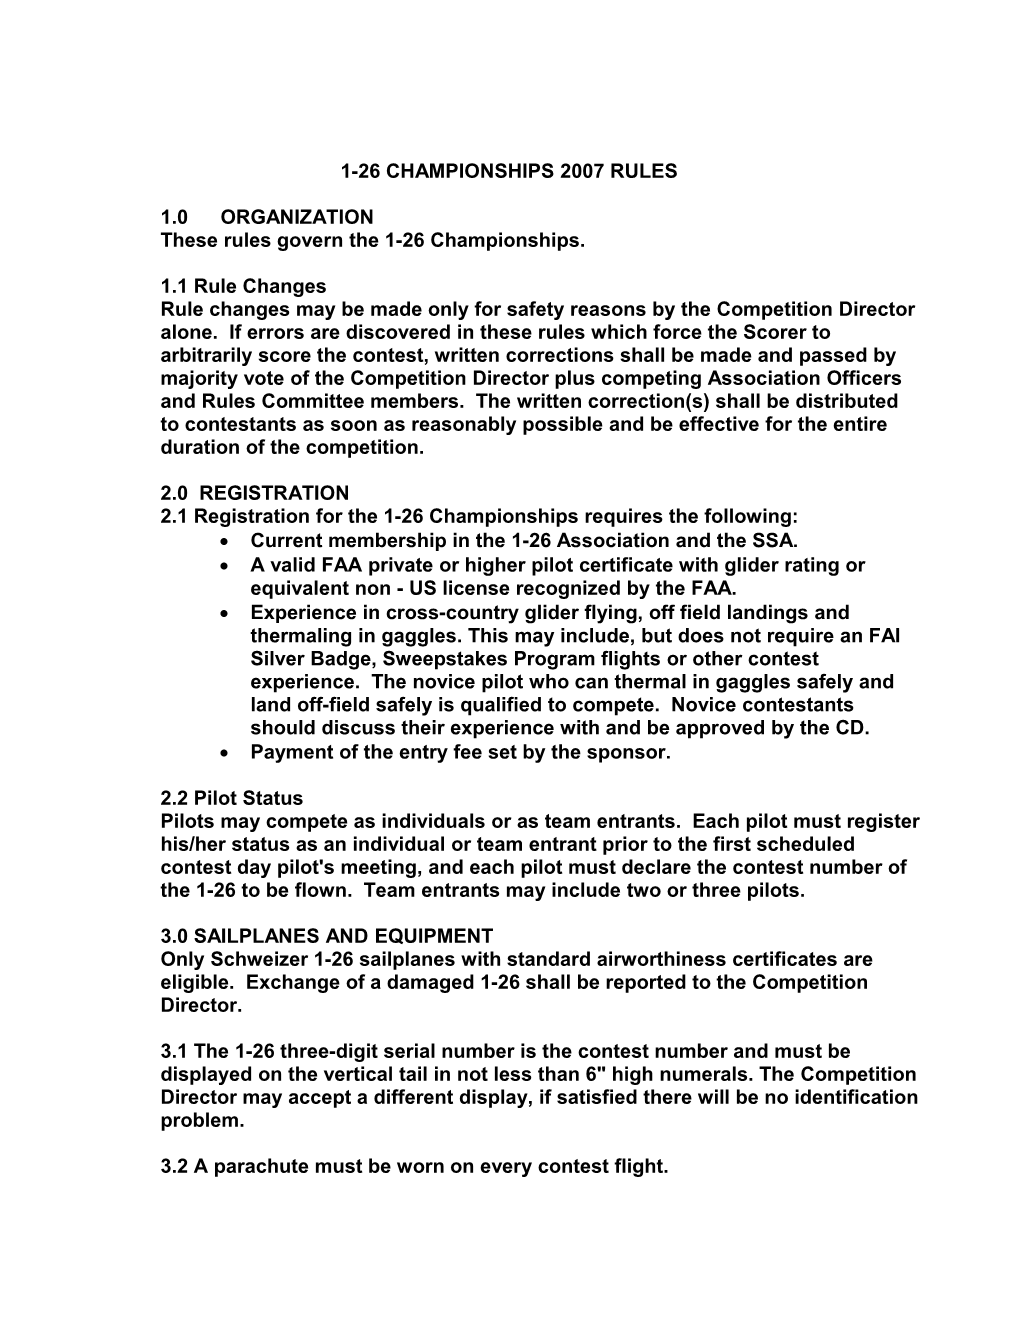 1996 Rules DRAFT 12/95 Page 1